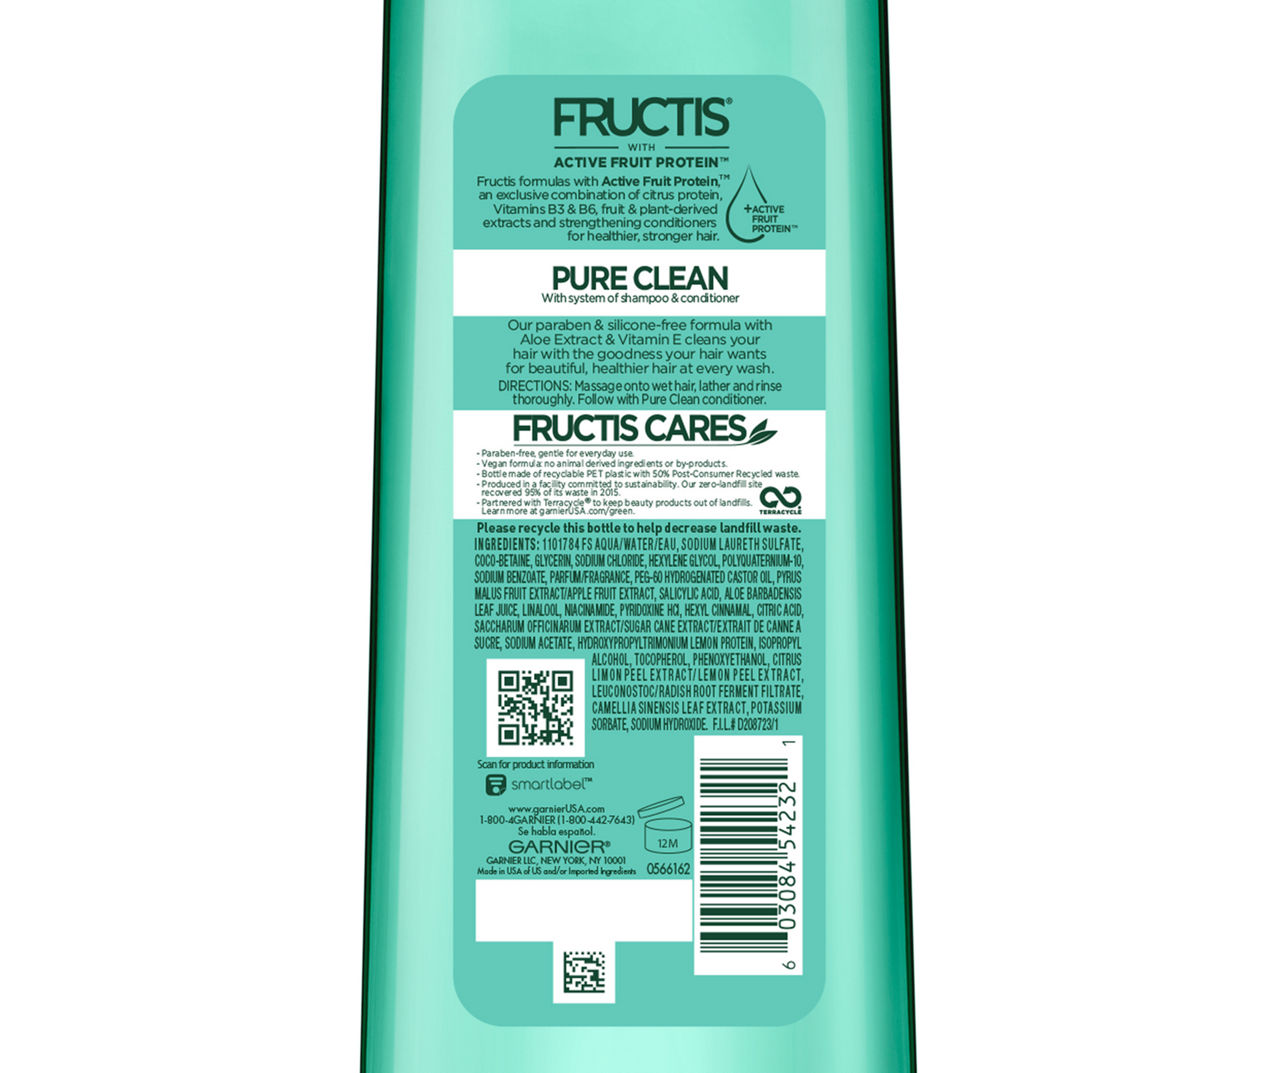 Fructis Garnier Clean Garnier Pure 22 Fructis Shampoo, Big E Vitamin Extract, Fortifying oz. | fl. and With Aloe Lots